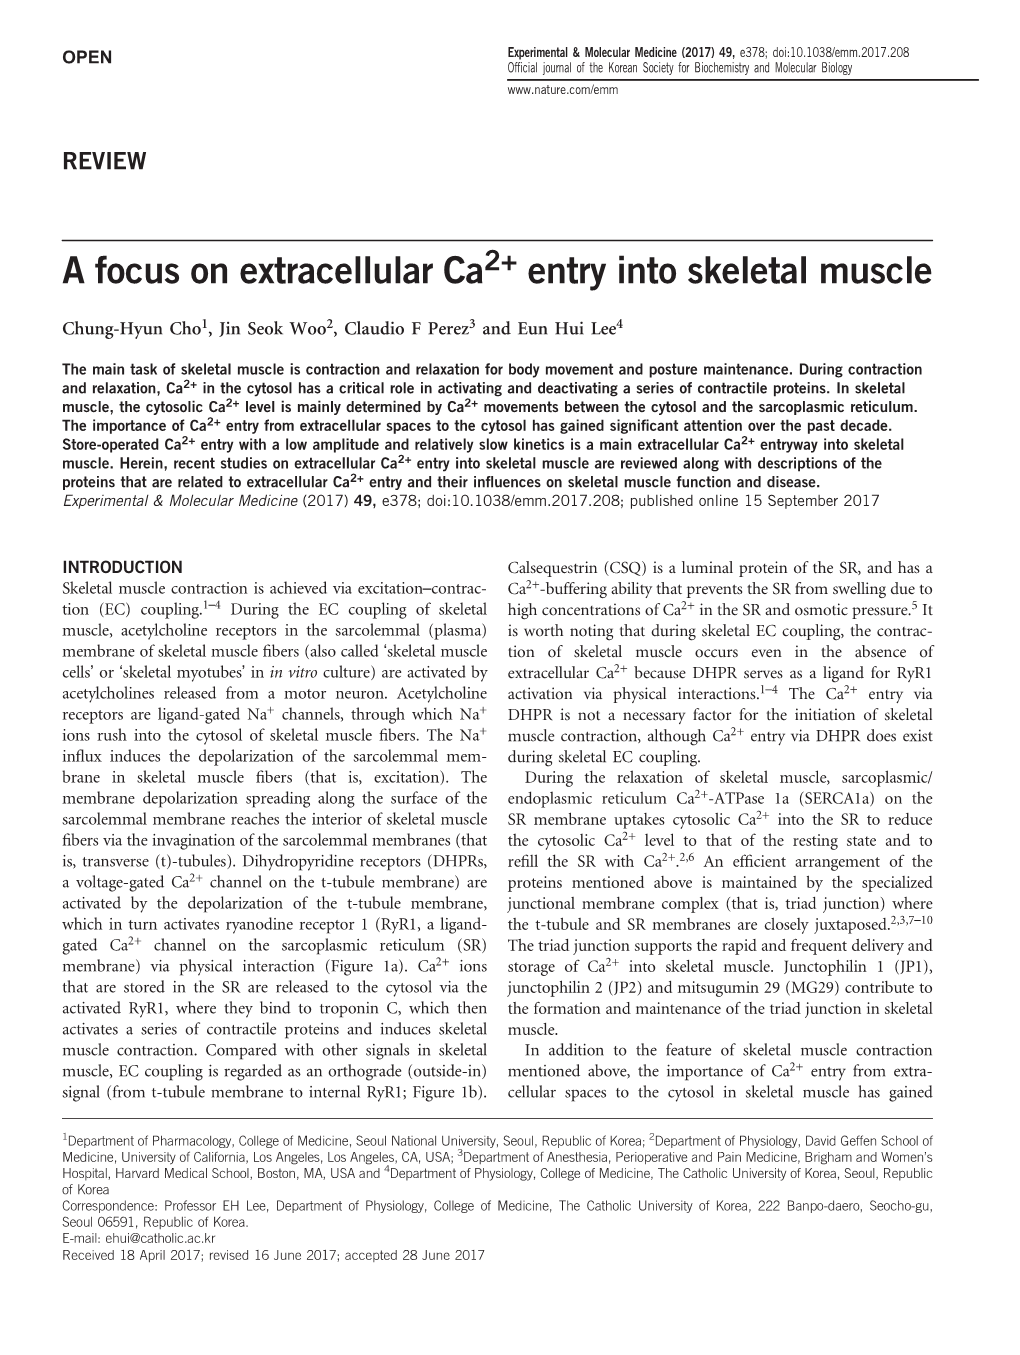 A Focus on Extracellular Ca2+ Entry Into Skeletal Muscle